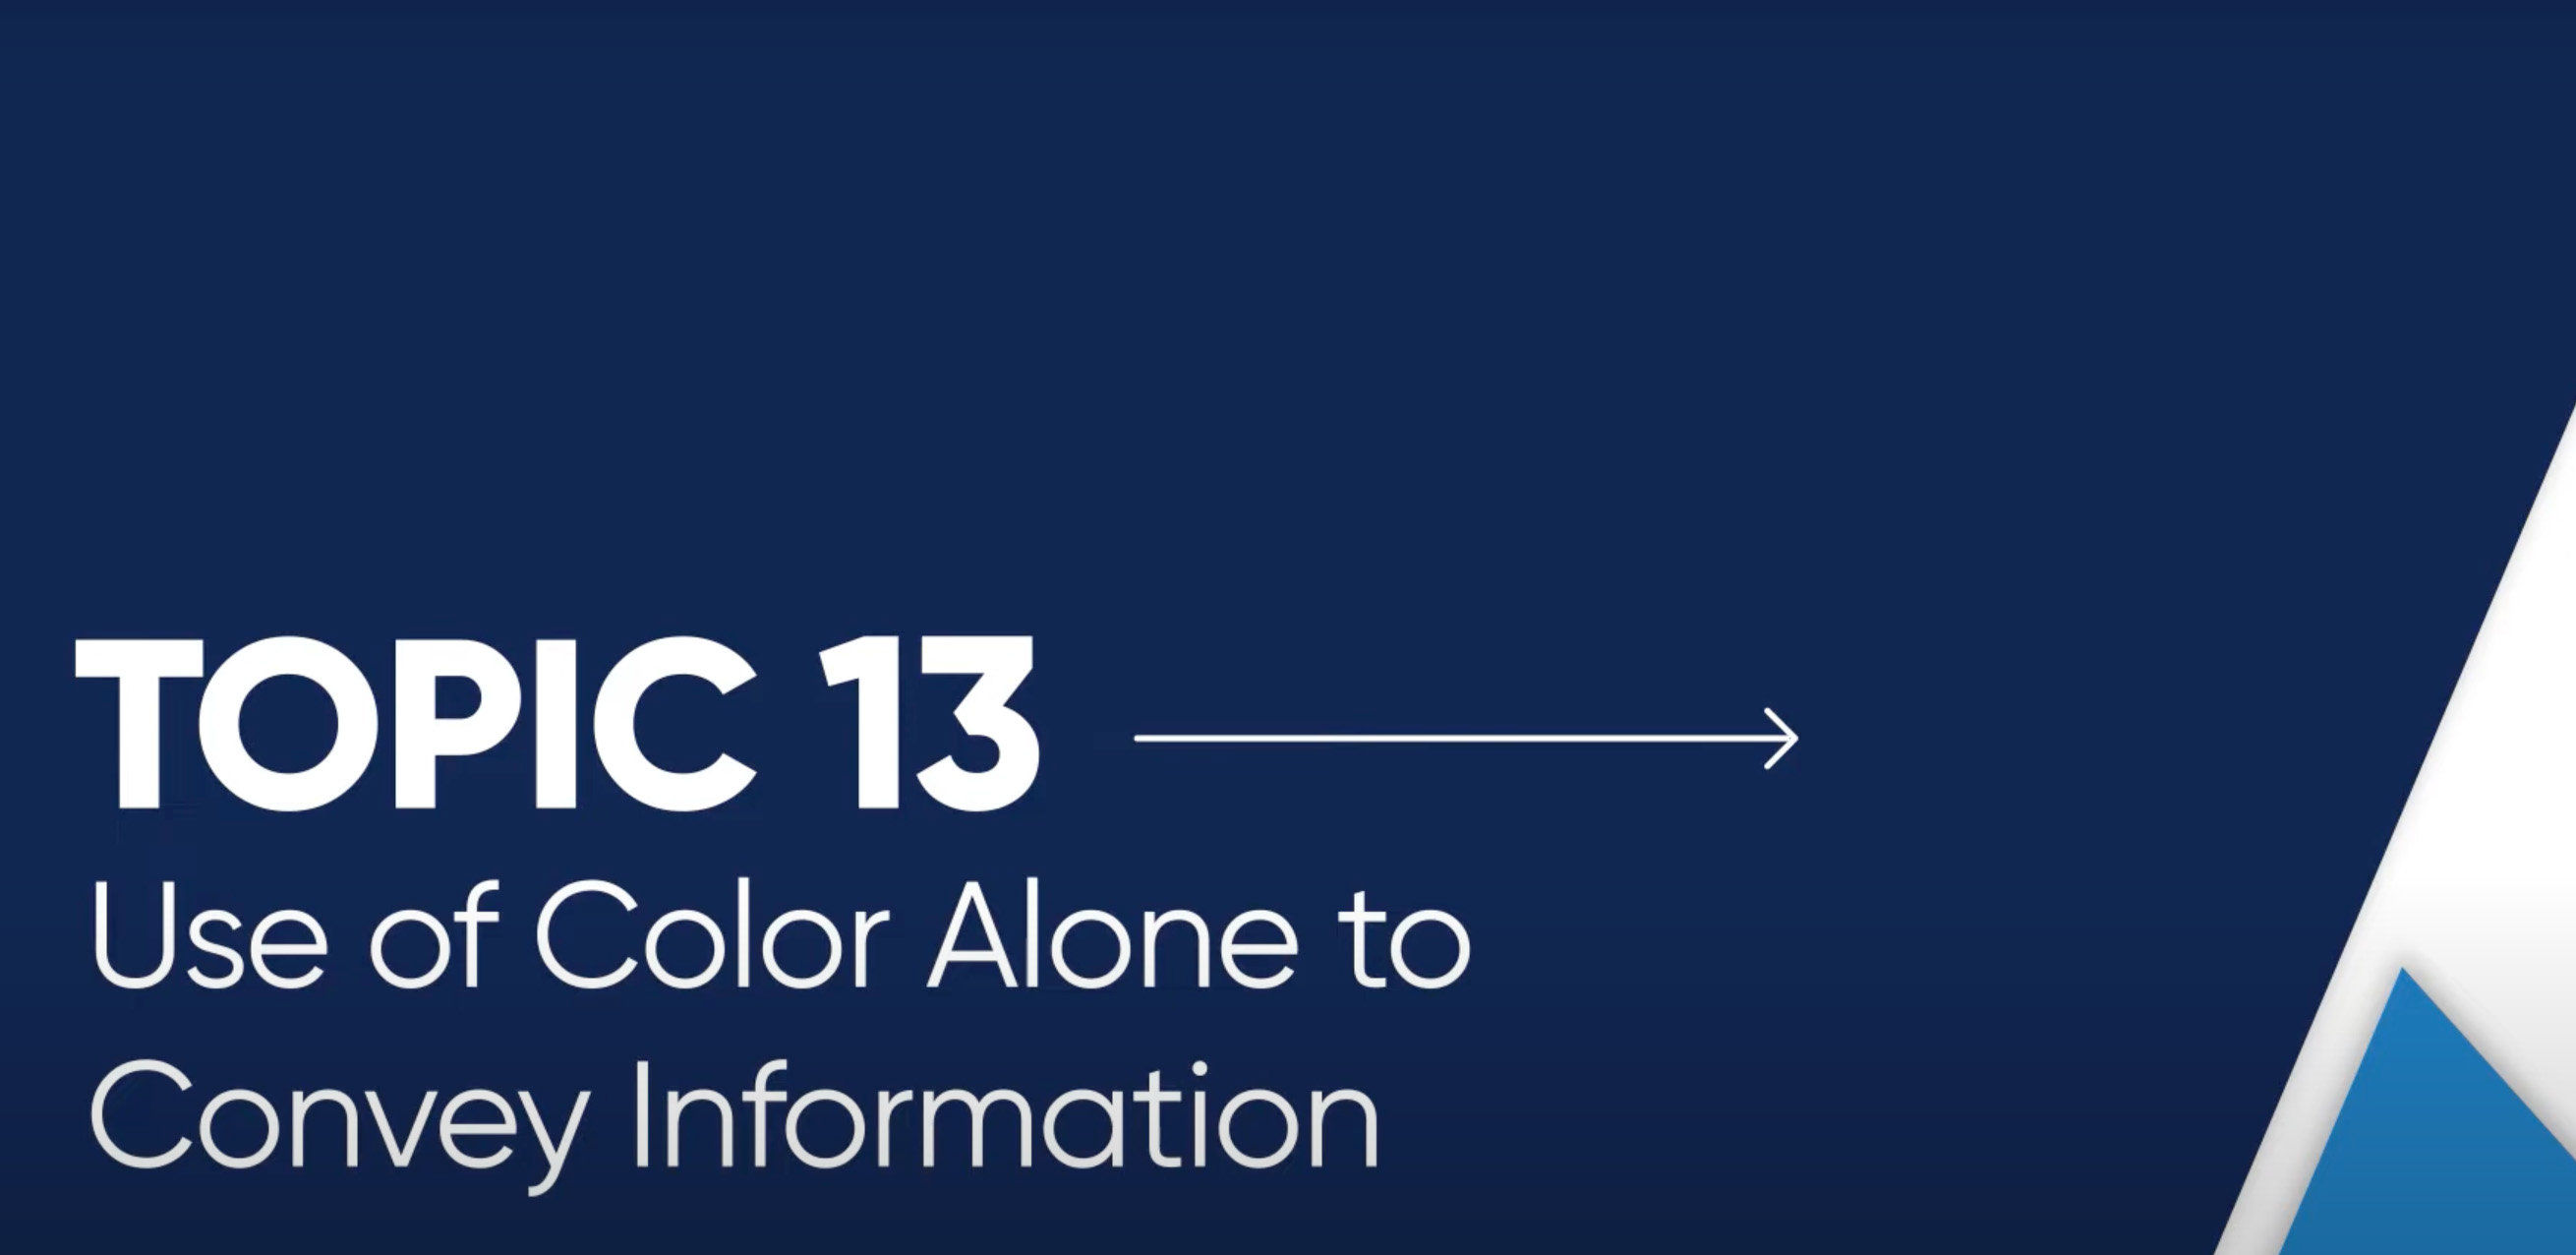 Video thumbnail for Topic 13: Use of Color Alone to Convey Information.